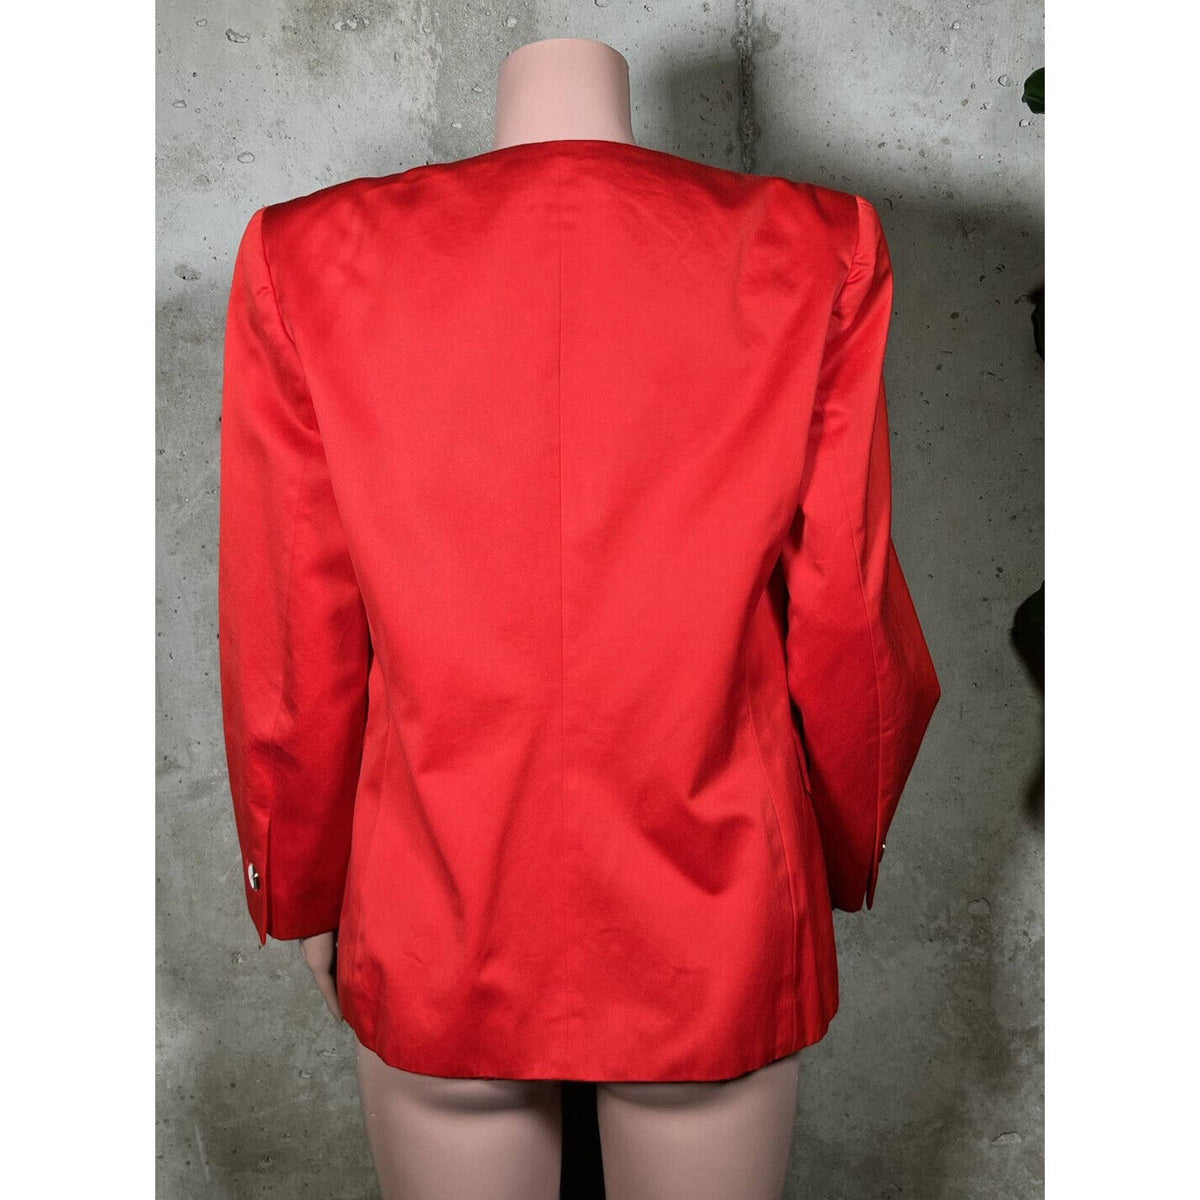 Escada Red Two Toned Button Up Jacket Vintage Sz.8(38)